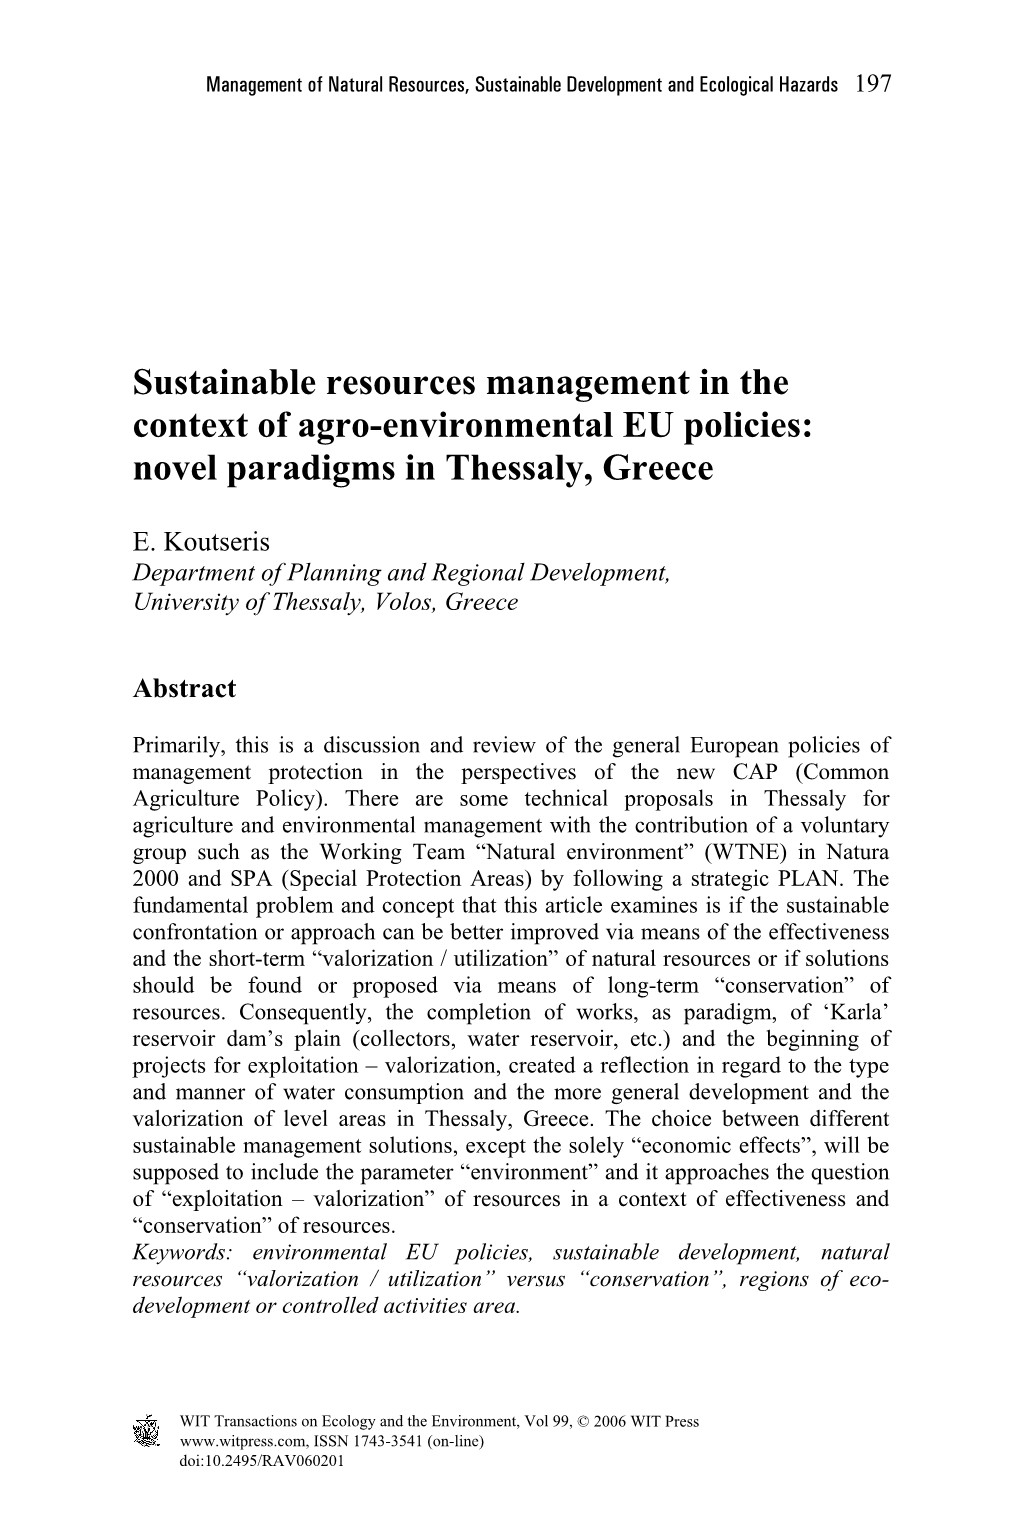 Sustainable Resources Management in the Context of Agro-Environmental EU Policies: Novel Paradigms in Thessaly, Greece